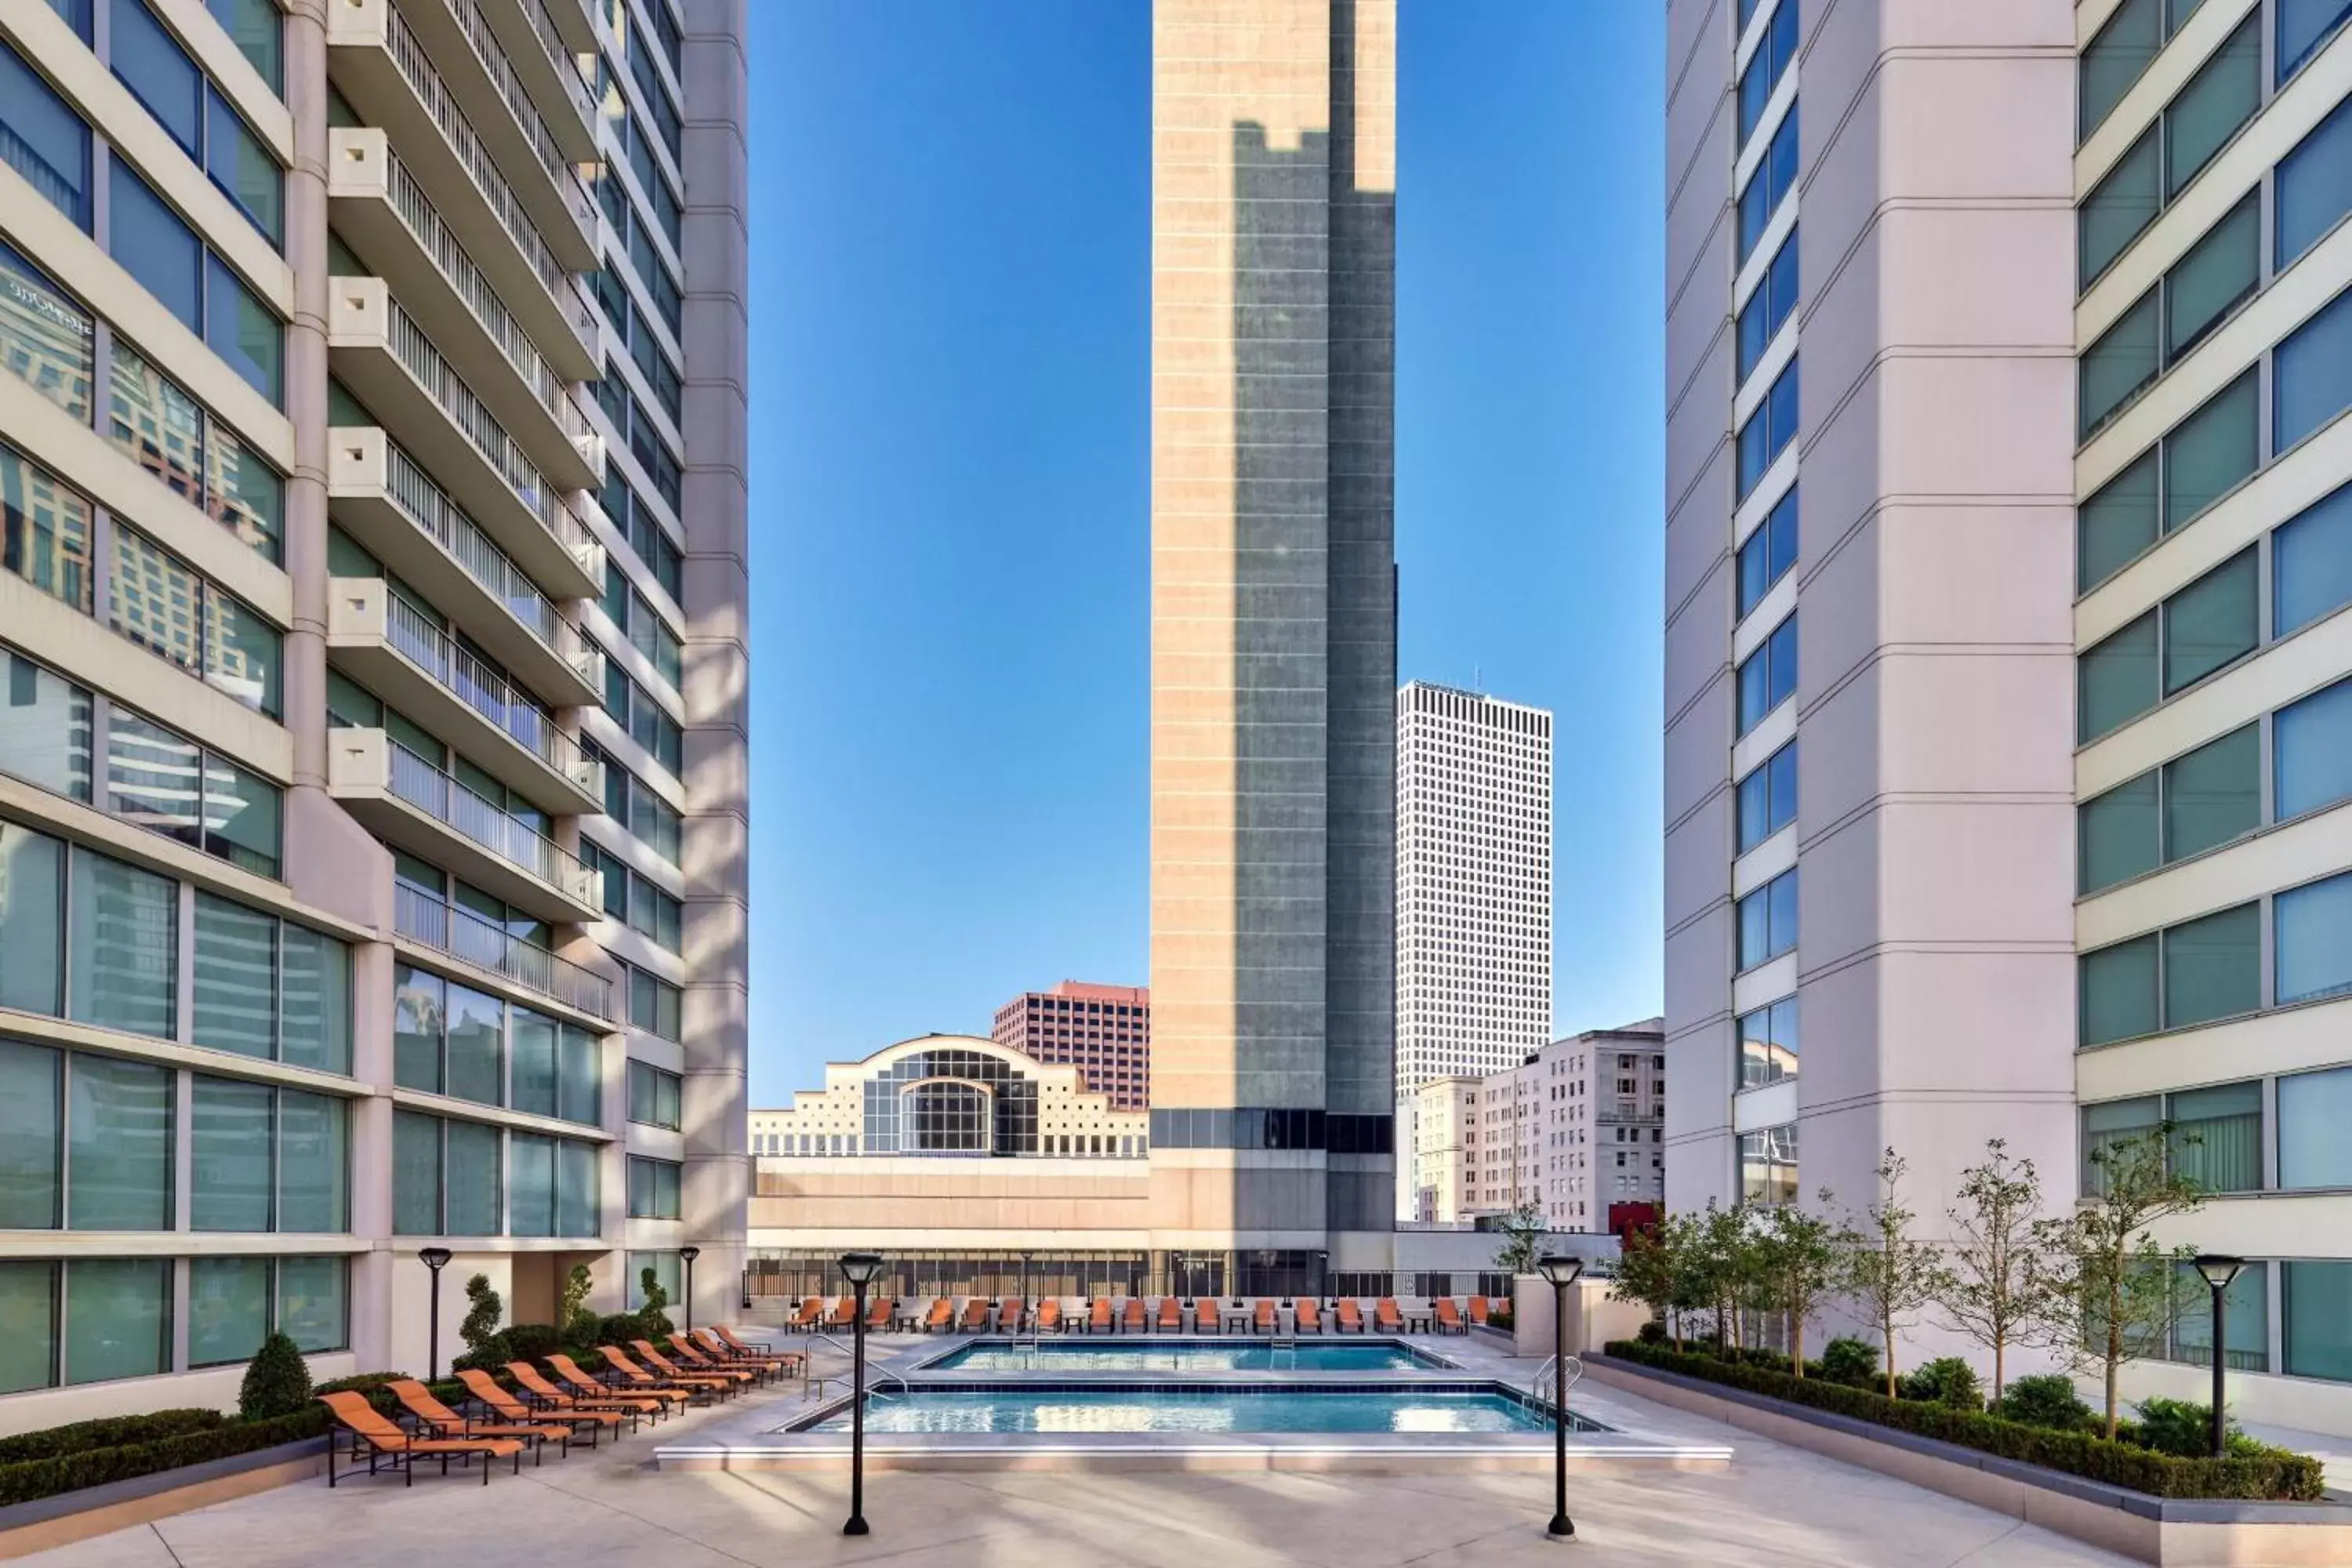 Swimming pool, Property Building in New Orleans Marriott